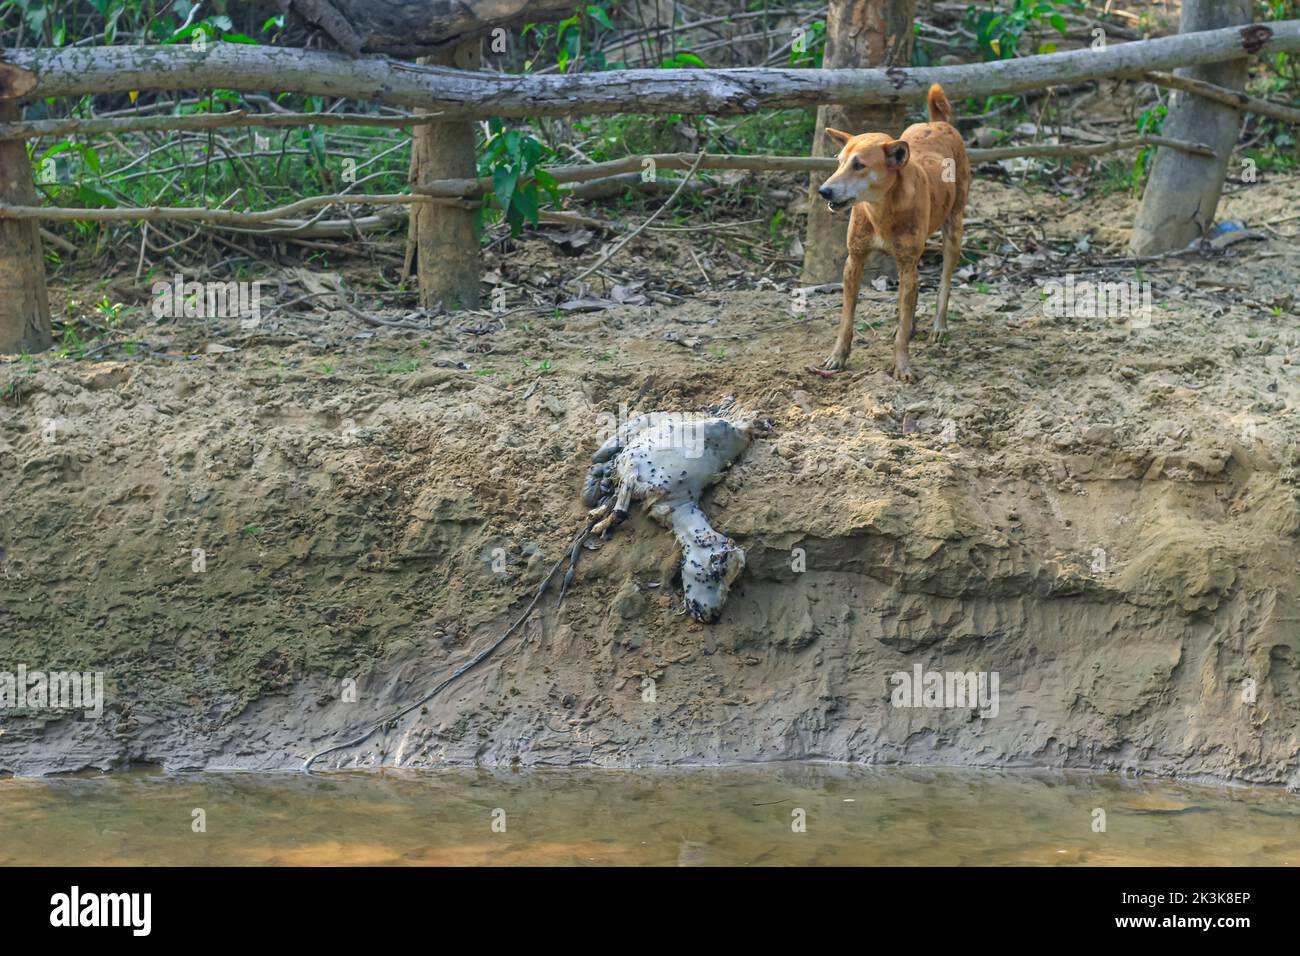 A dog is eating a rotten goat on the bank of the river. Outdoor landscape photo of the street wild dog eating a dead body of a goat. Stock Photo